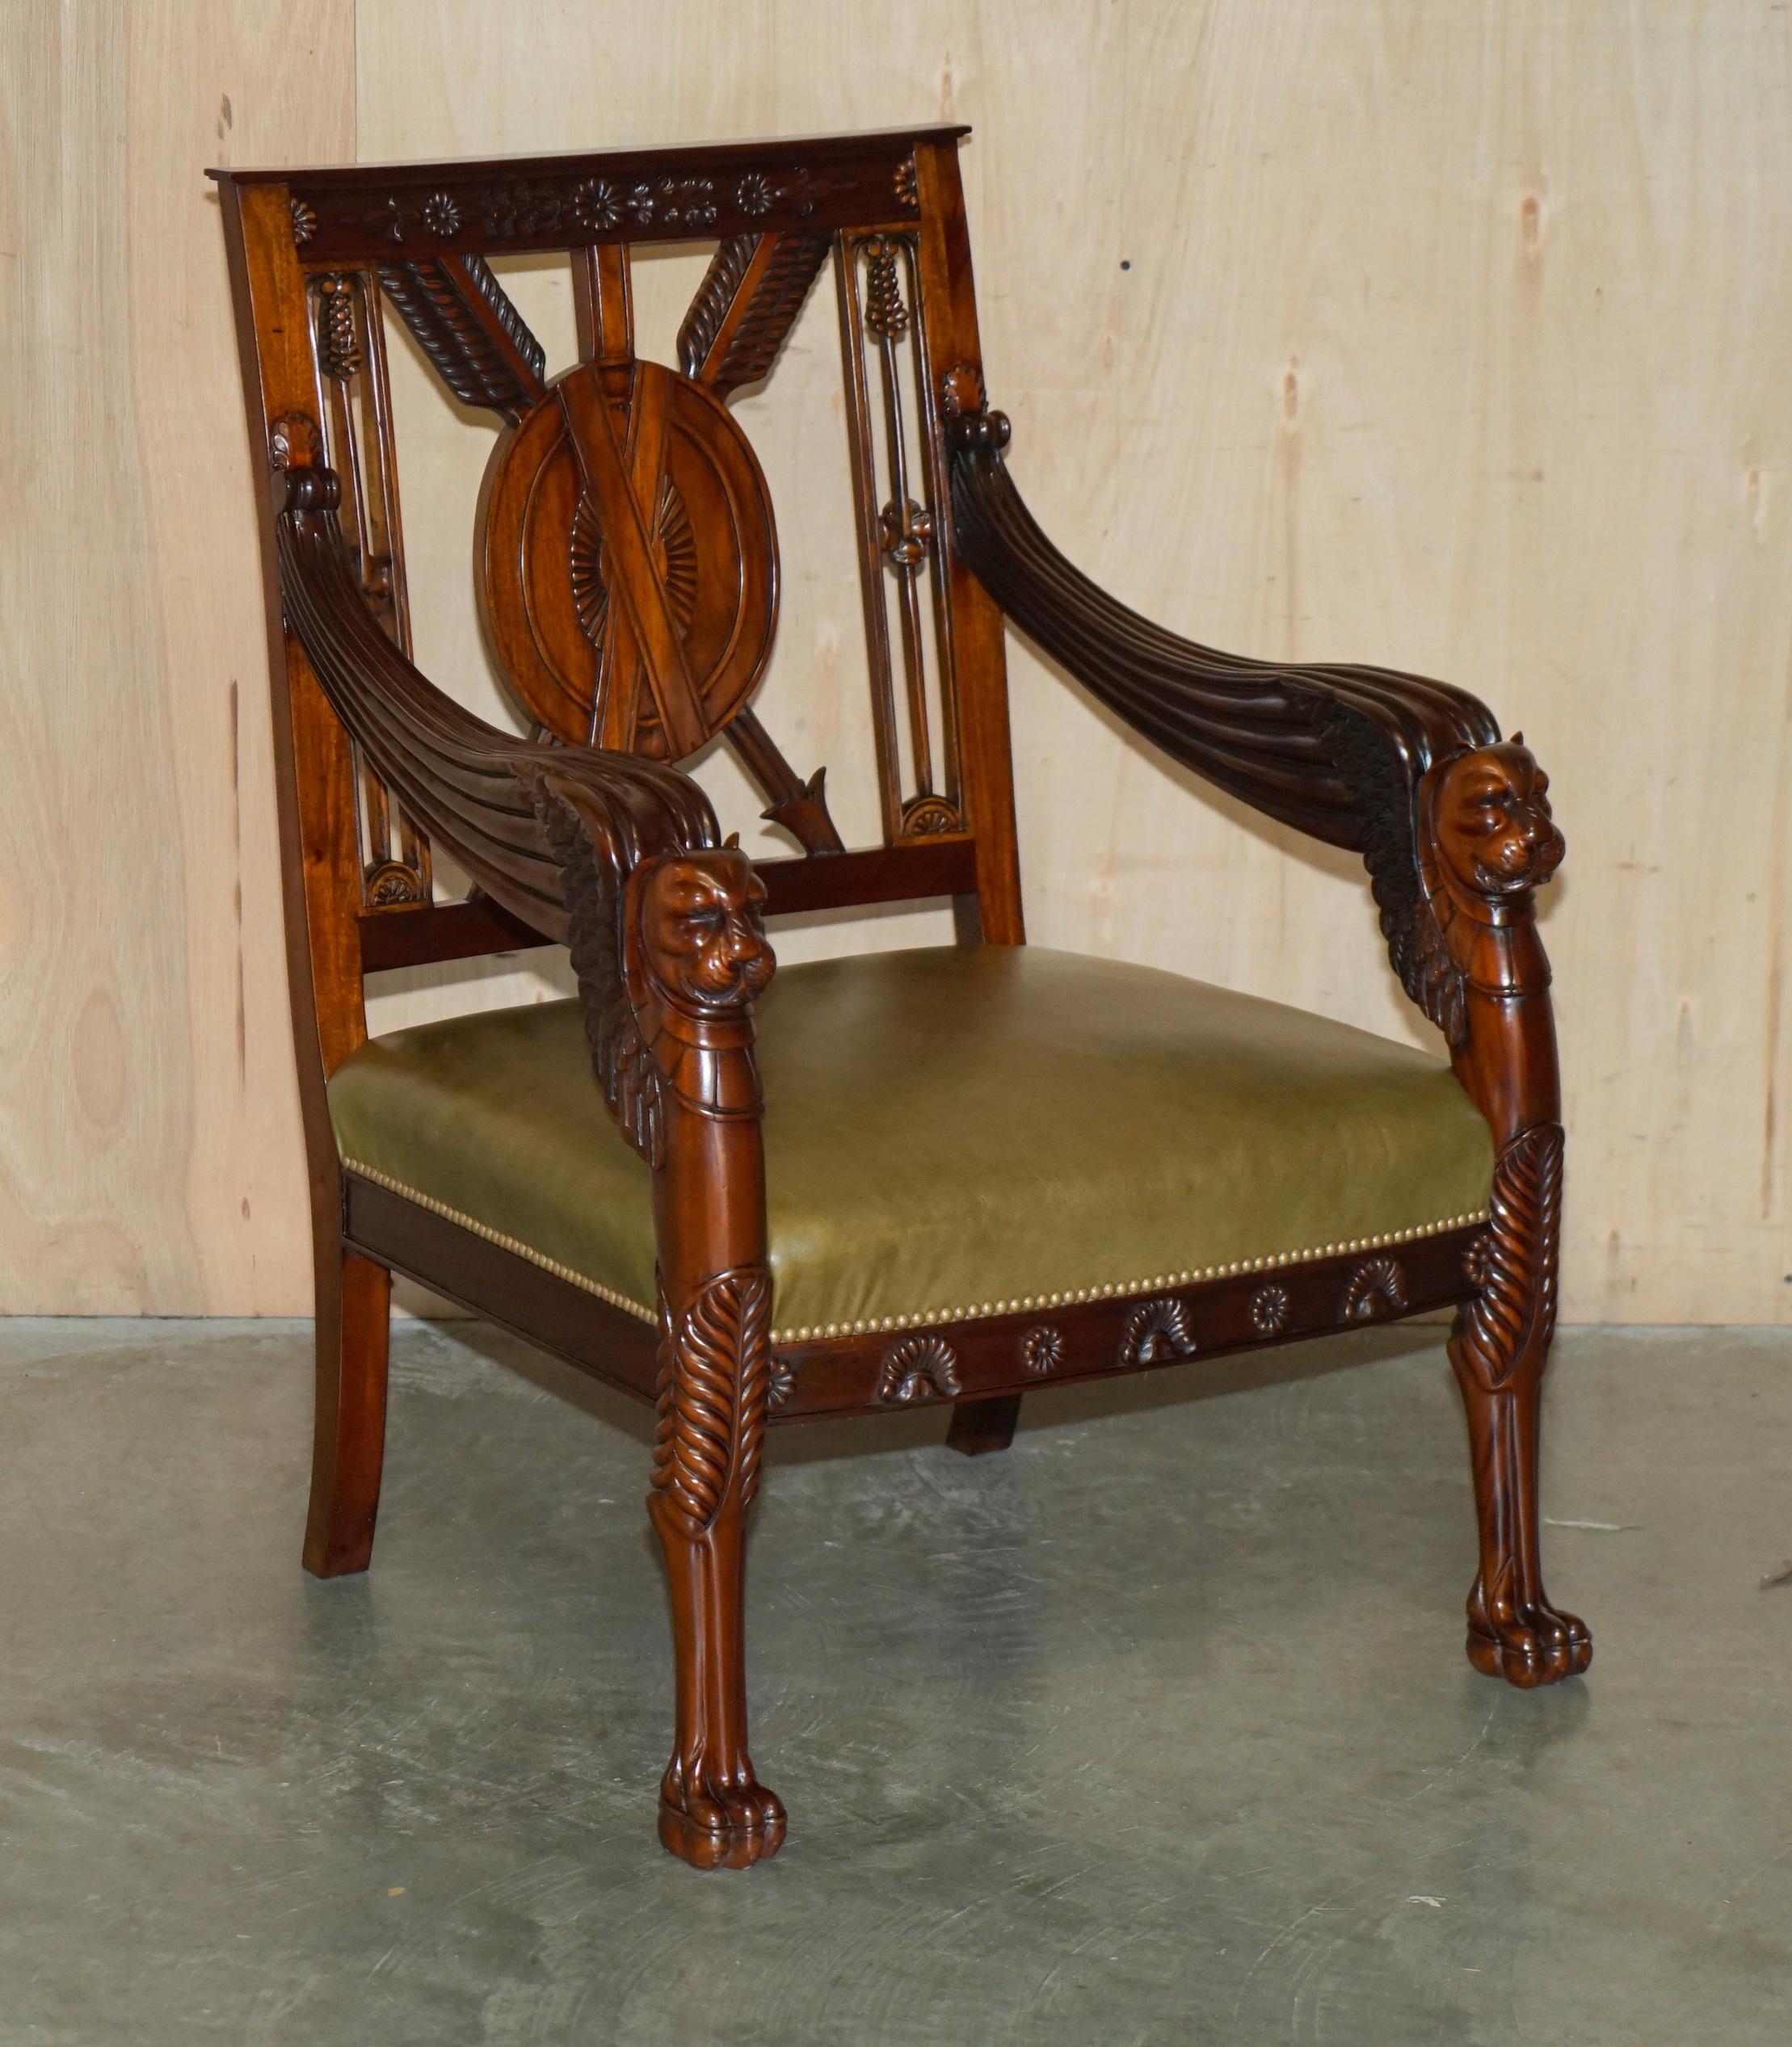 EXQUISITE PAIR OF HAND CARved HARDWOOD LiBRARY ARMCHAIRS LION GRIFFON WING ARMS im Angebot 13